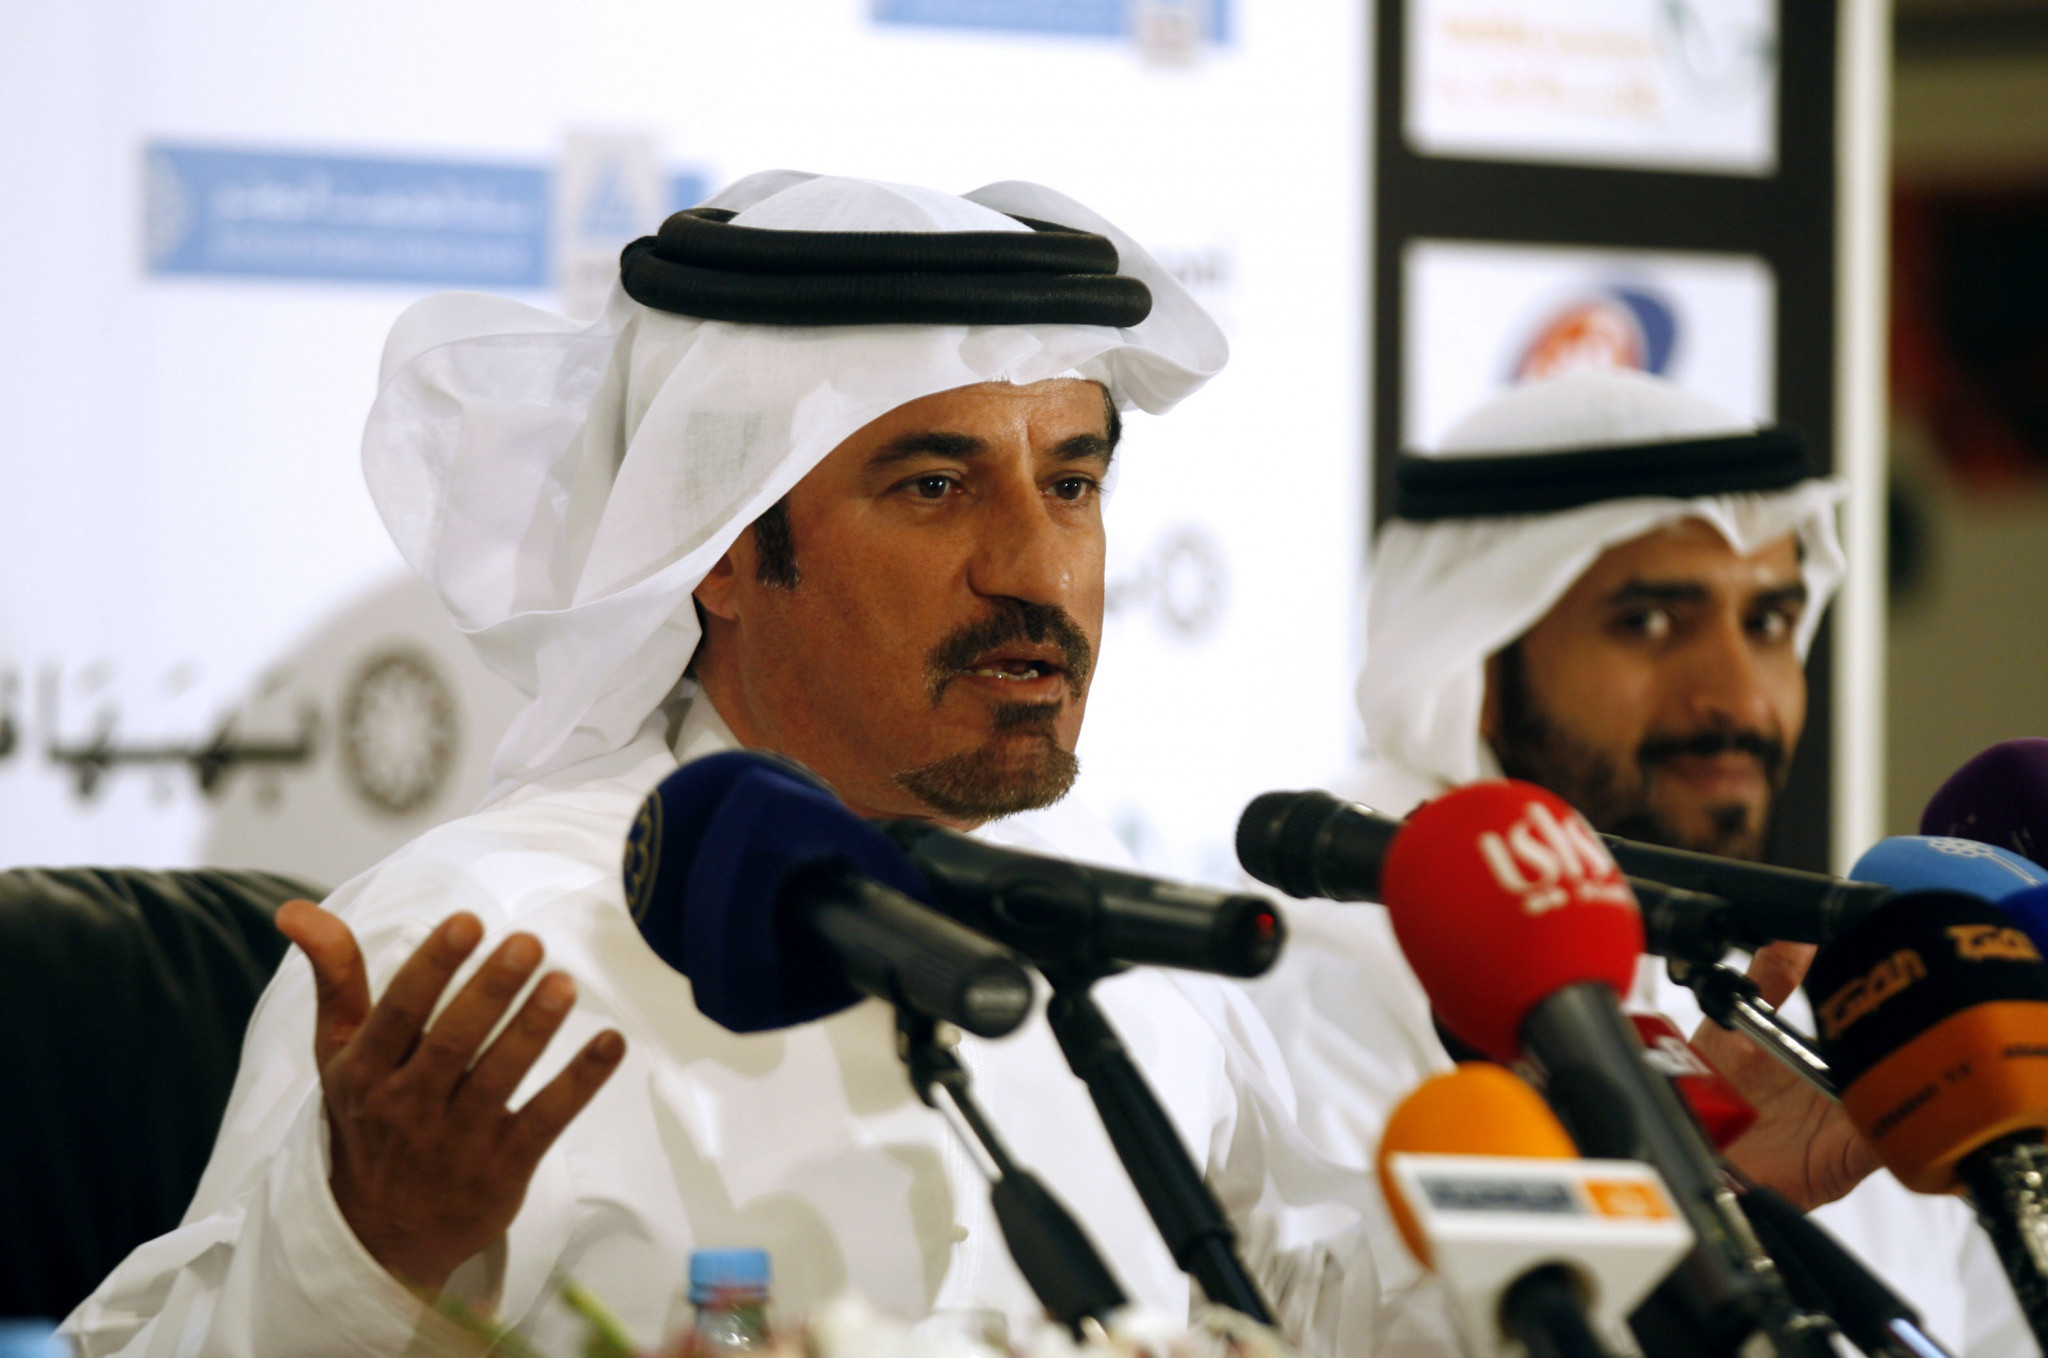 Mohammed Ben Sulayem has been elected as FIA President ©Getty Images